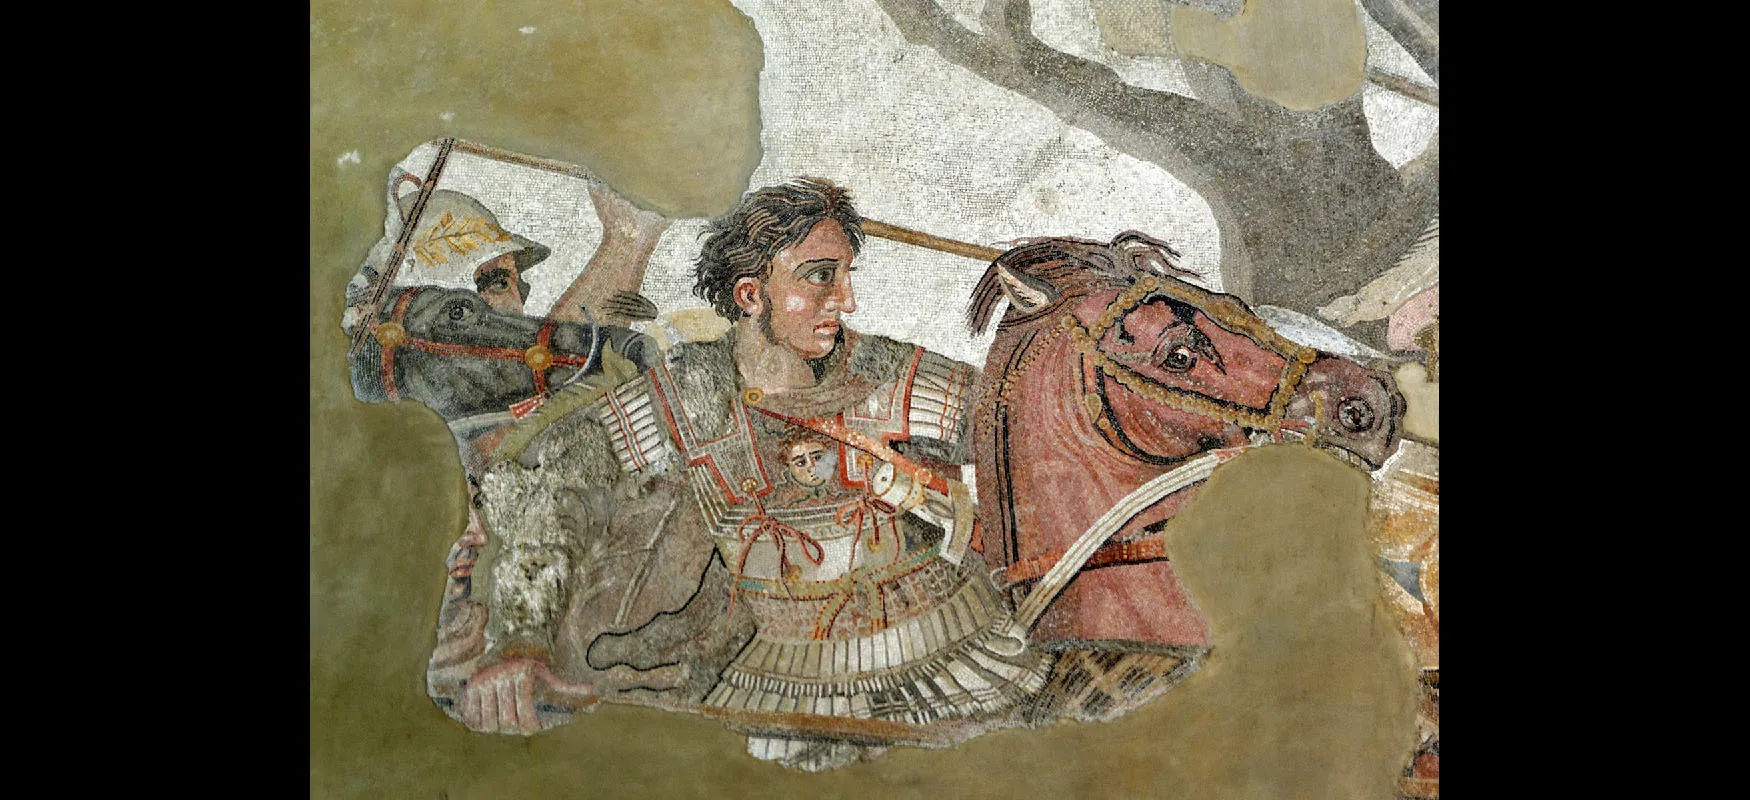 An image of a painting is shown, partially obscured at the left side and at the bottom with green colors. In the image, a man is shown riding on a brown horse with brown, black, and red reins. The man wears a silver suit of armor with red trim, has brown chin length hair, a large nose, and long sideburns. An image of a face shows in the armor on his chest. He holds a long brown spear. Behind the man a black horse head is seen and a man’s eye under a silver helmet with brown feathers. Black trees are seen in the background and a grayish sky.